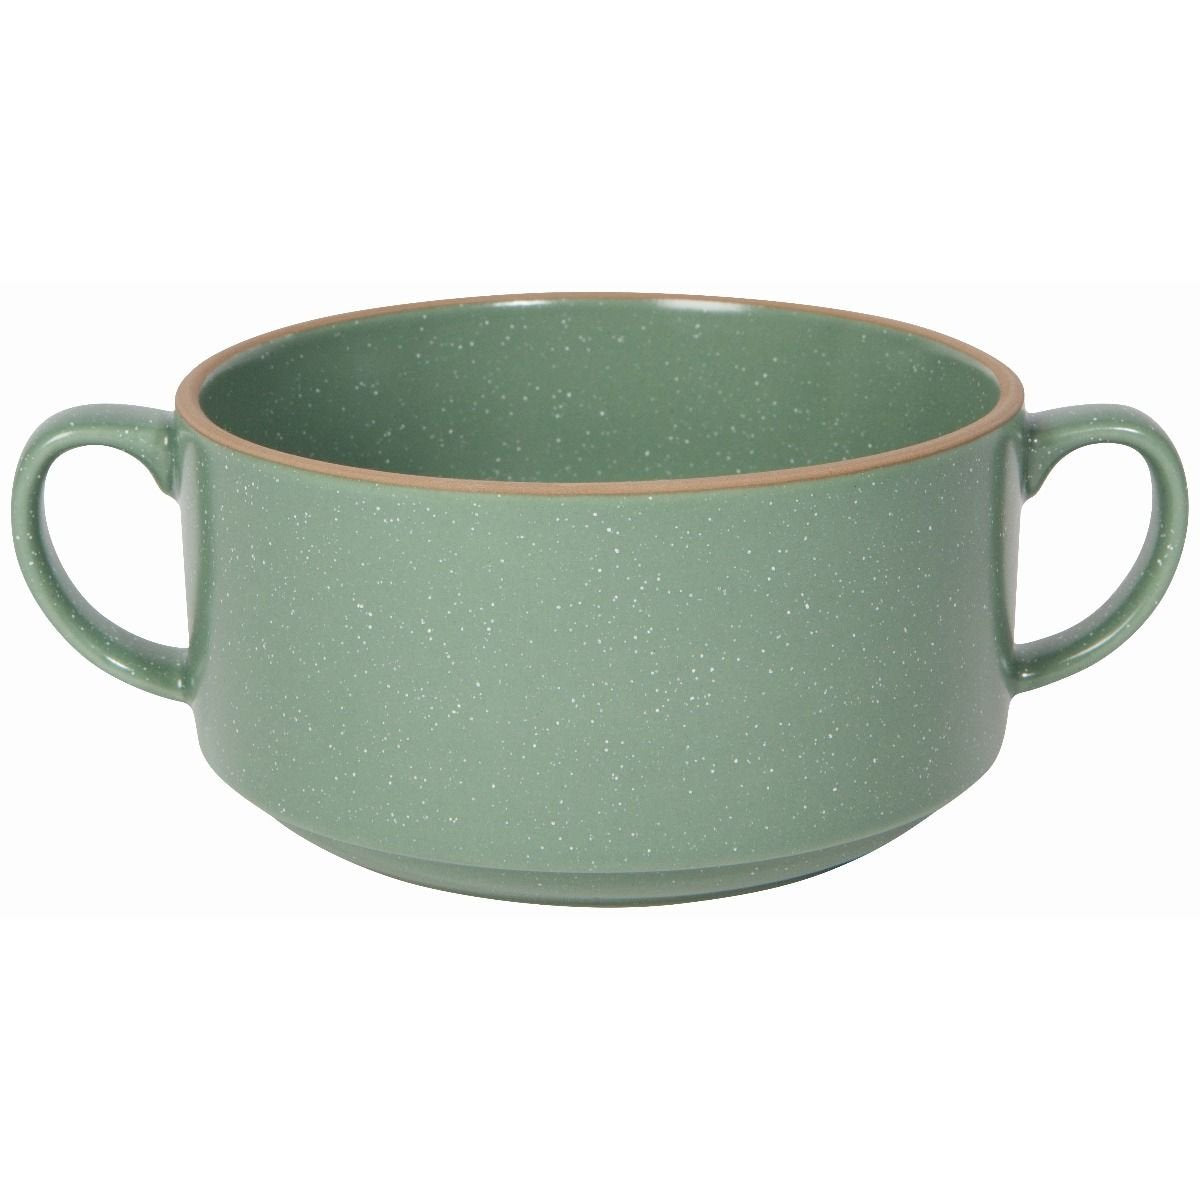 green soup bowl with 2 handles shown on a white background.